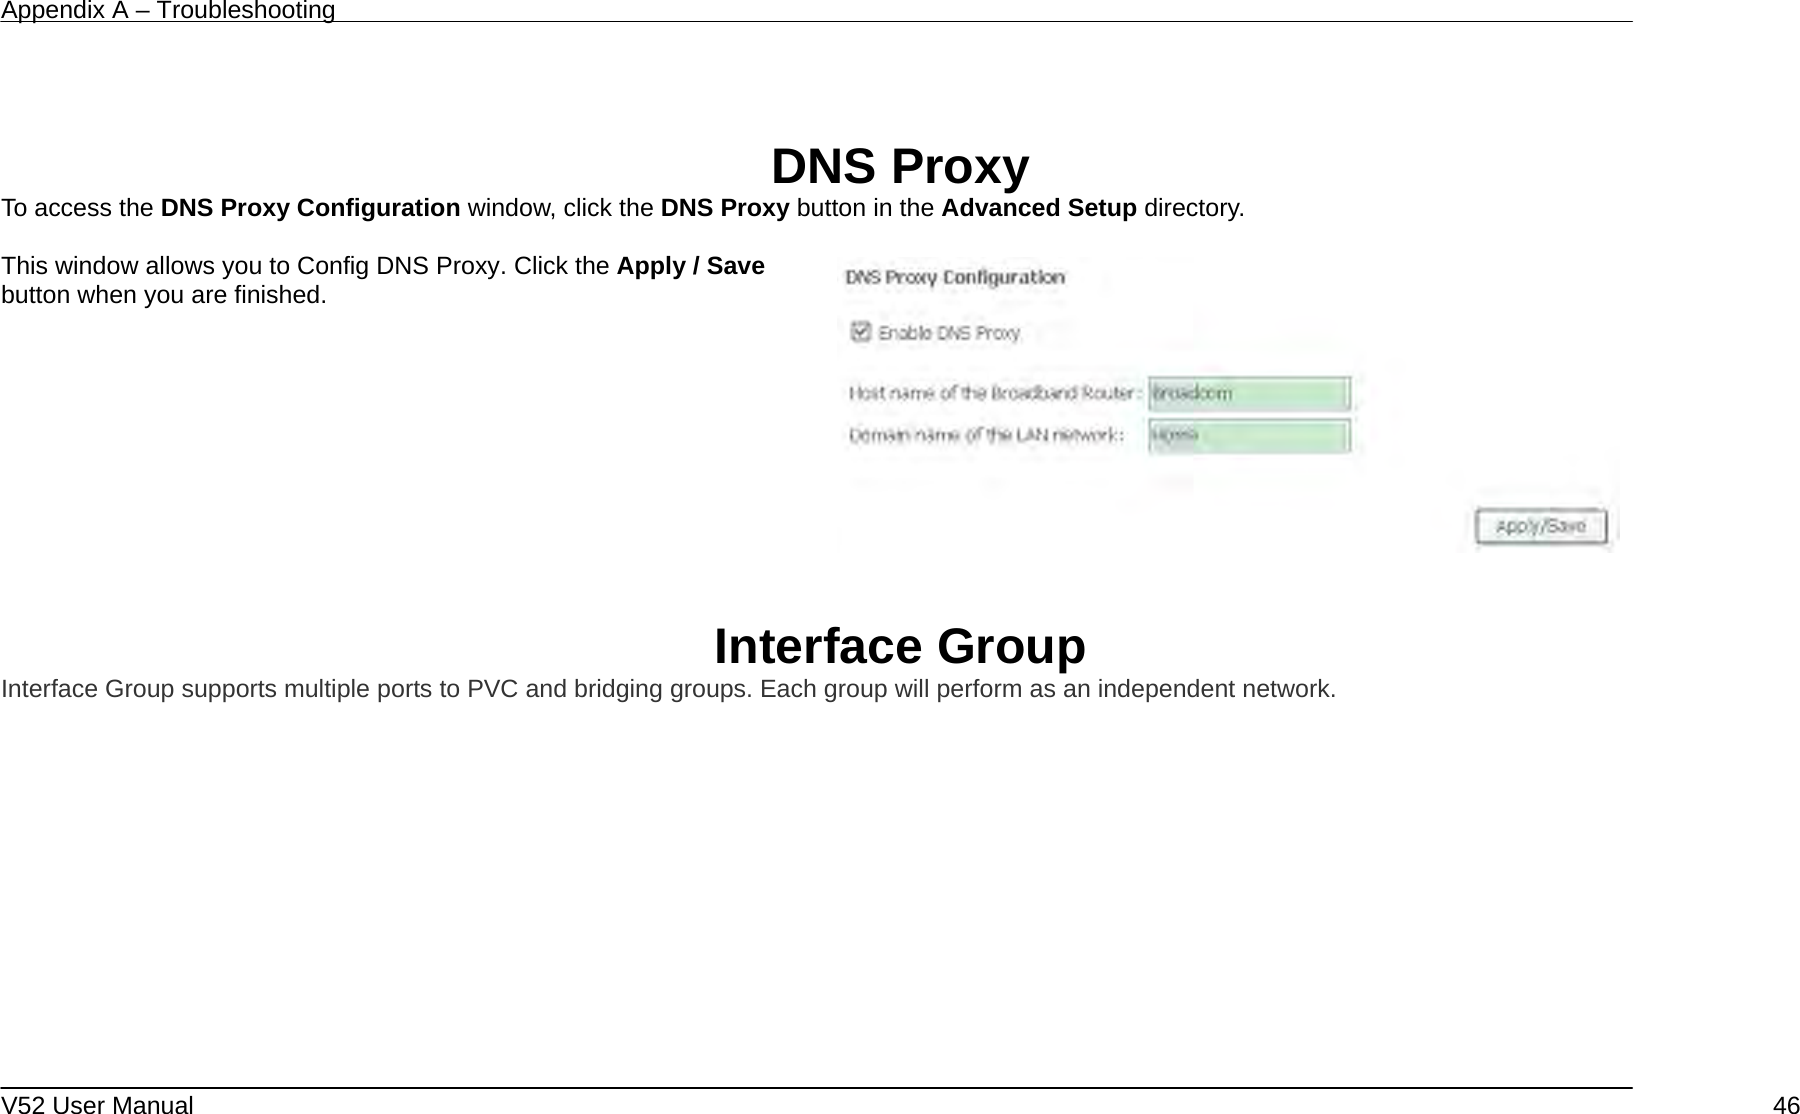 Appendix A – Troubleshooting   V52 User Manual    46  DNS Proxy To access the DNS Proxy Configuration window, click the DNS Proxy button in the Advanced Setup directory.  This window allows you to Config DNS Proxy. Click the Apply / Save button when you are finished.      Interface Group Interface Group supports multiple ports to PVC and bridging groups. Each group will perform as an independent network.  